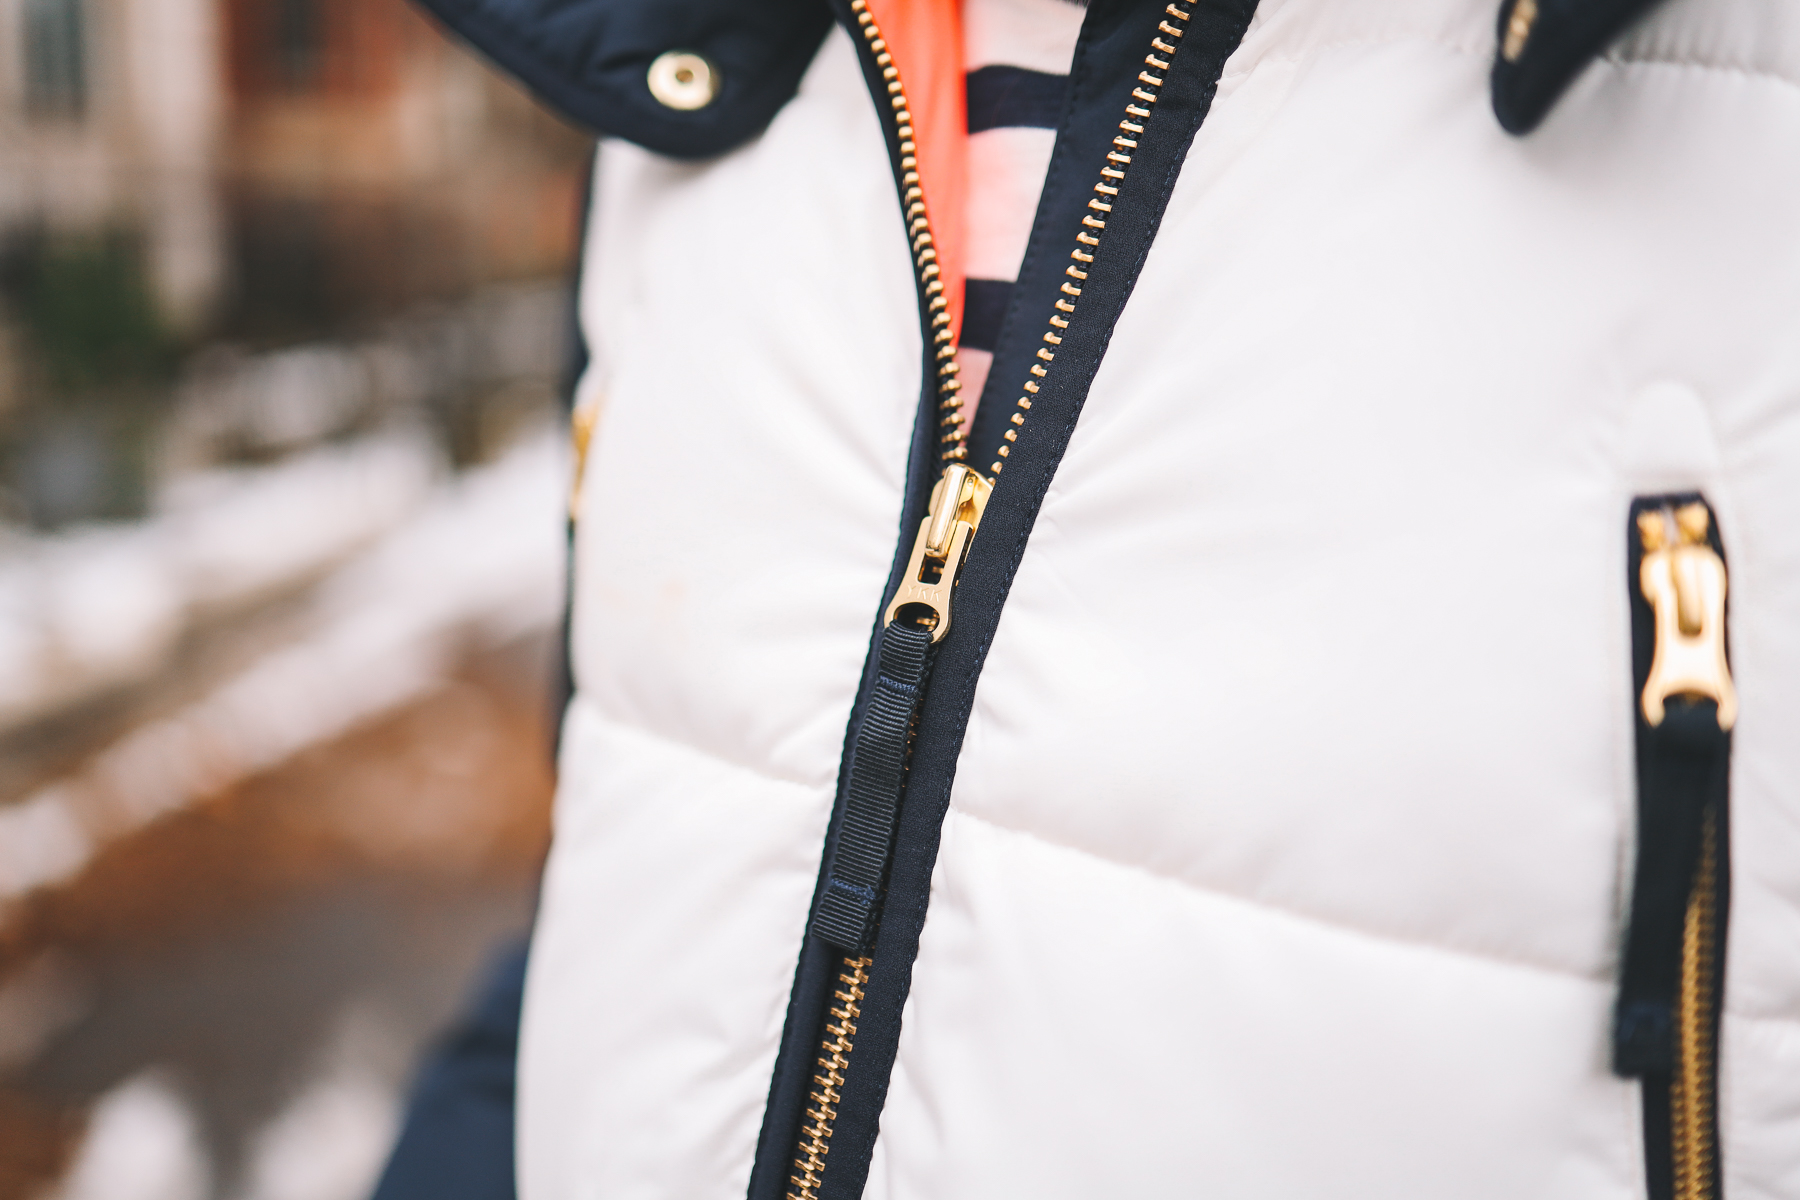 J.Crew Chateau Puffer Jacket Review